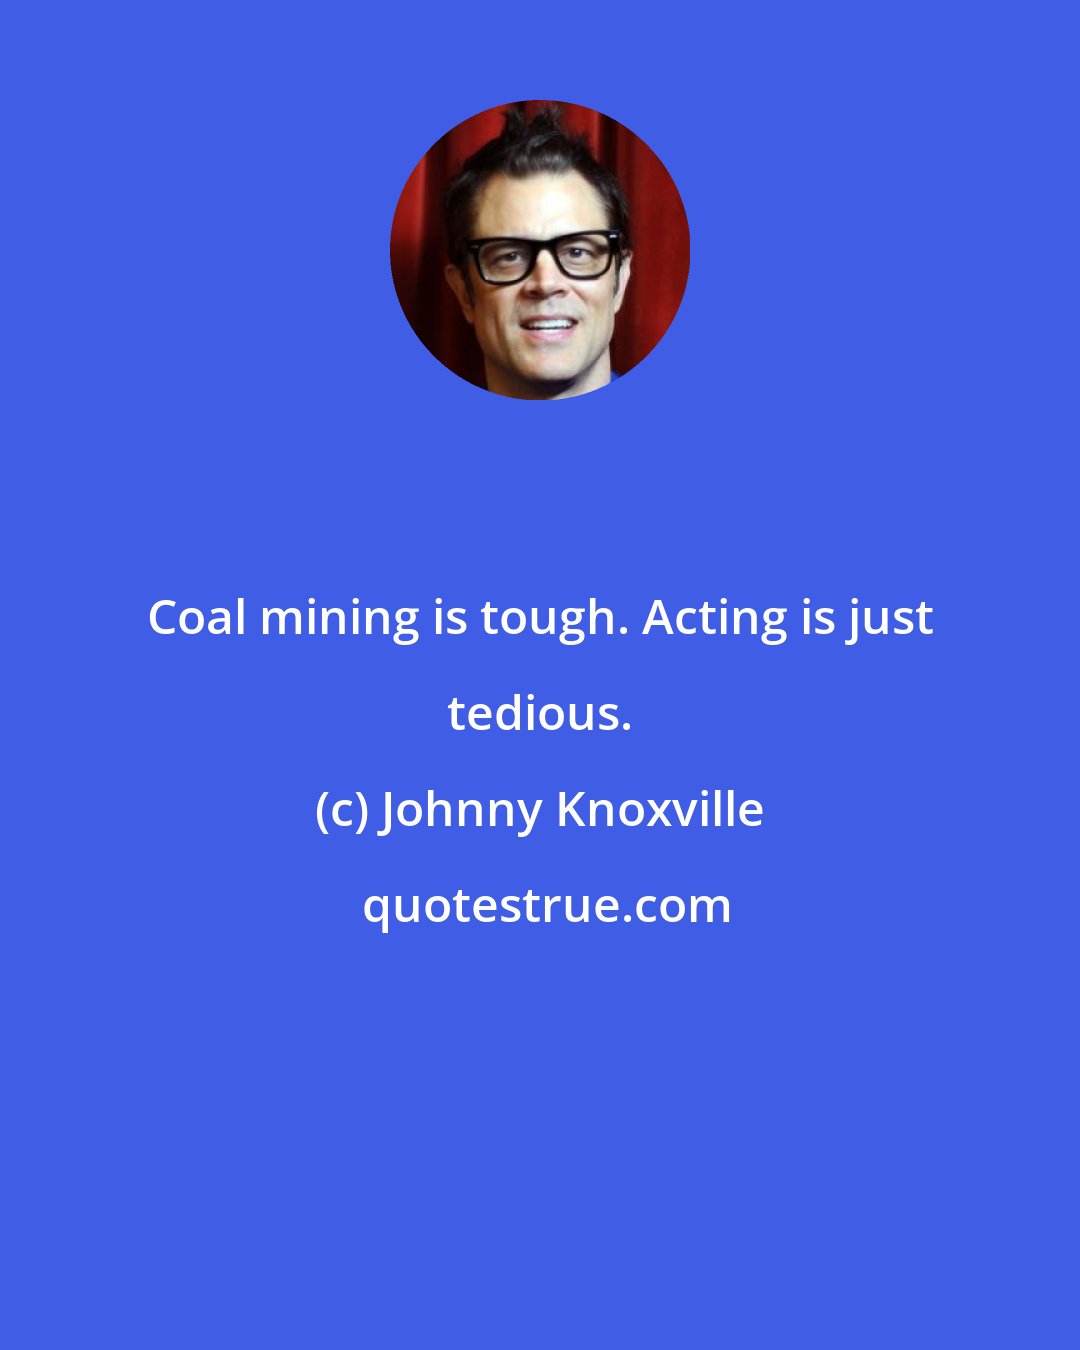 Johnny Knoxville: Coal mining is tough. Acting is just tedious.